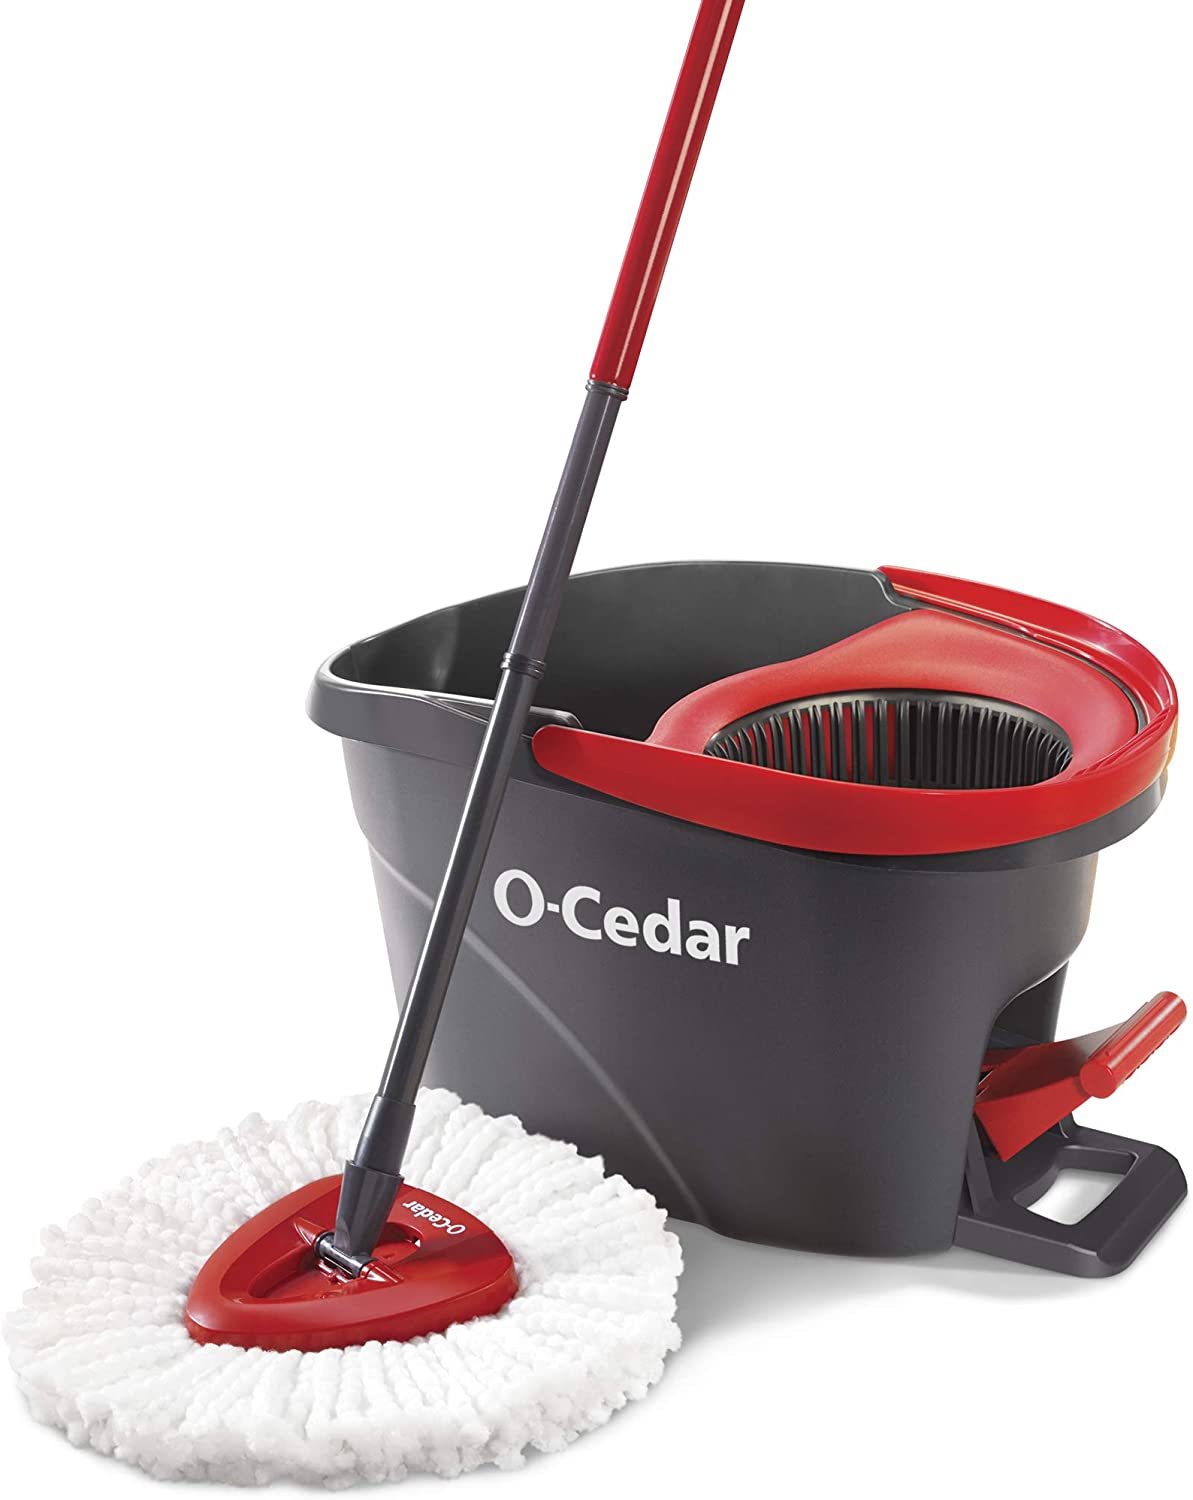 O-Cedar EasyWring Microfiber Spin Mop, Bucket Floor Cleaning System, Red, Gray 61